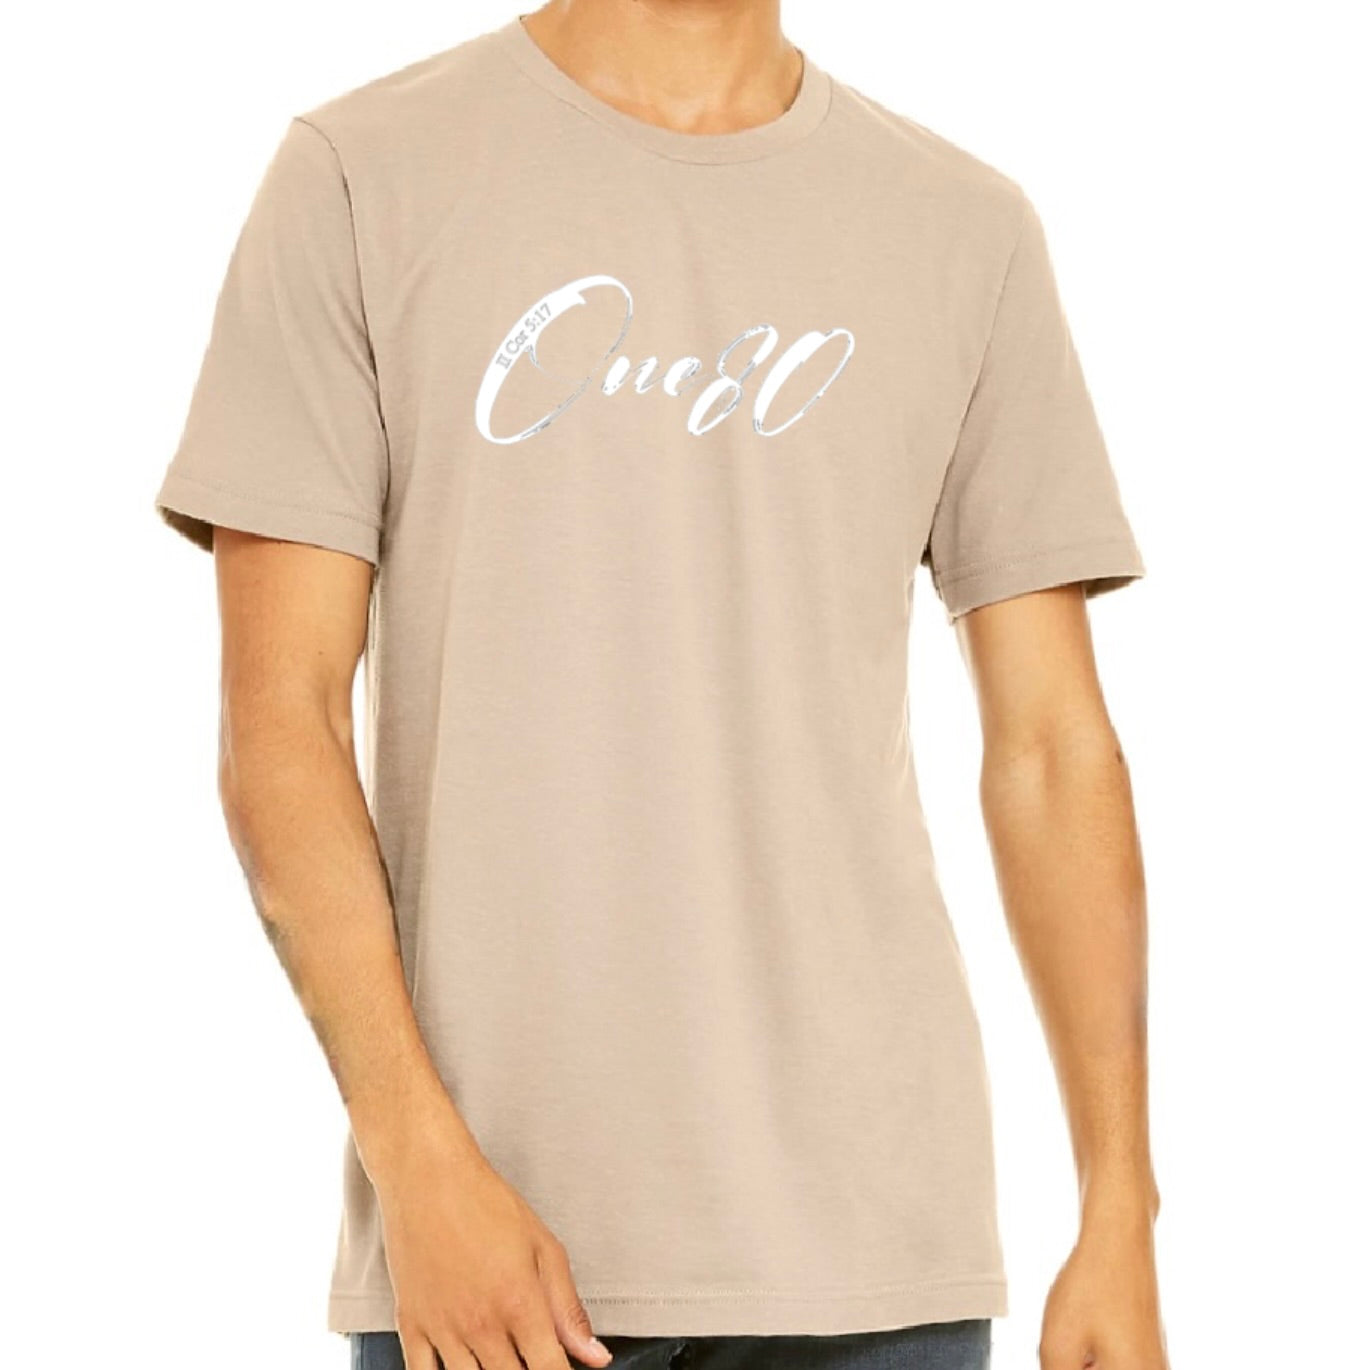 One80 T-Shirt (Neutral Colors)